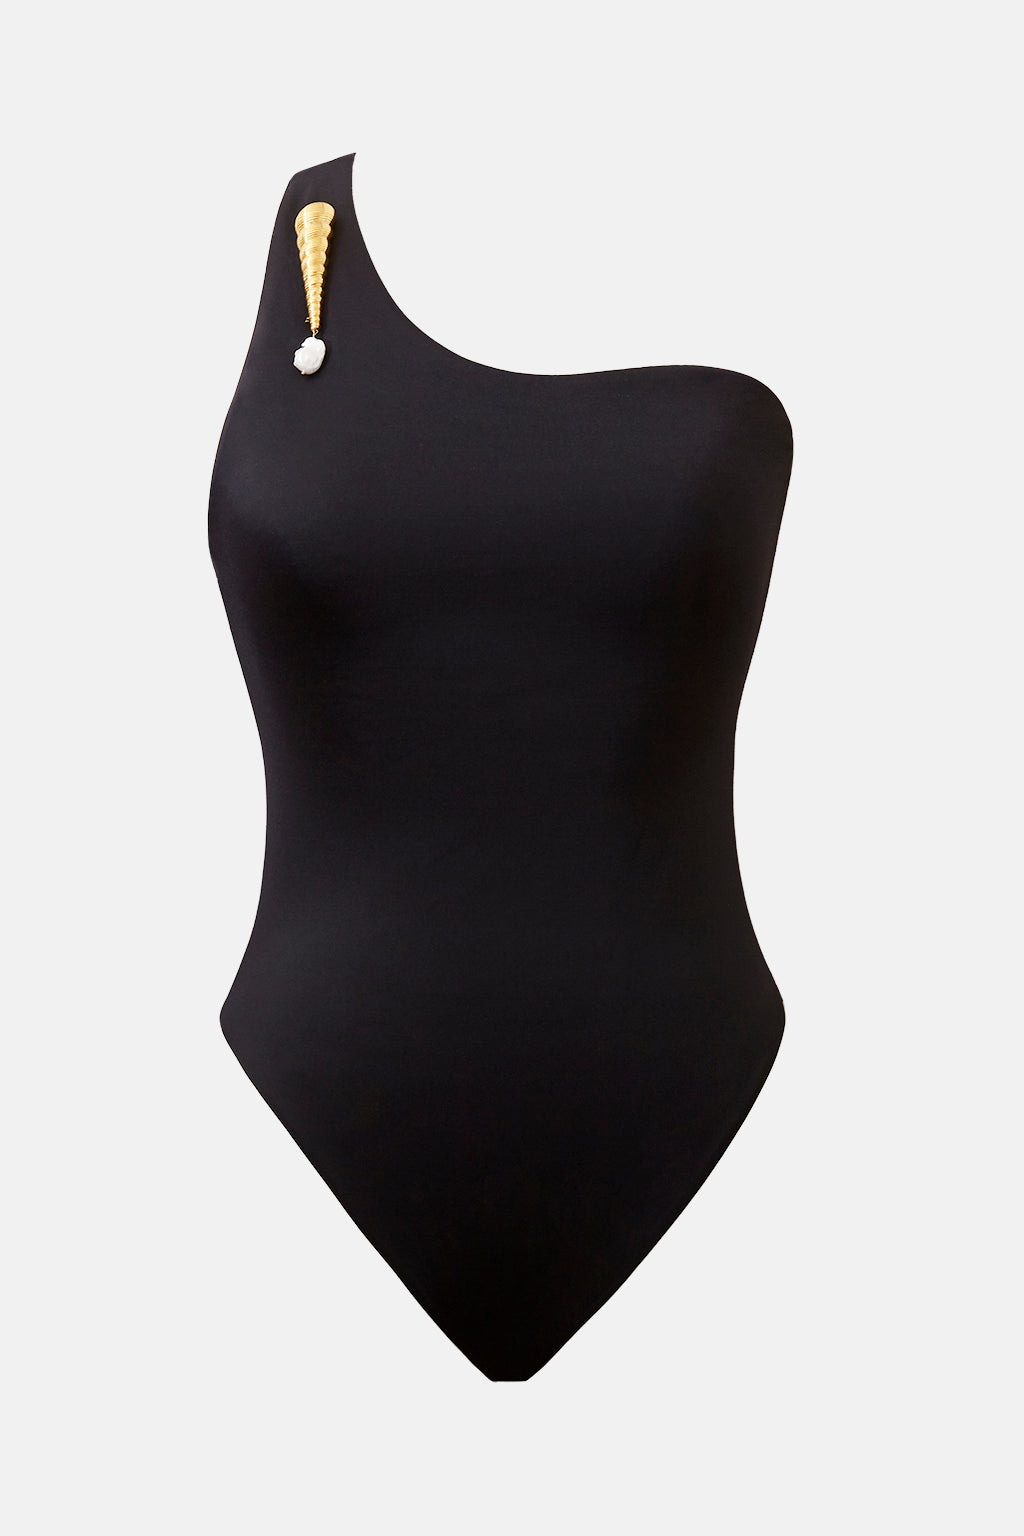 THE TOBI MAILLOT BLACK ONE PIECE SWIMSUIT ONE SHOULDER BATHING SUIT WITH GOLD PEARL BROOCH SUSTAINABLE BATHING SUIT LUXURY DESIGNER SWIMWEAR